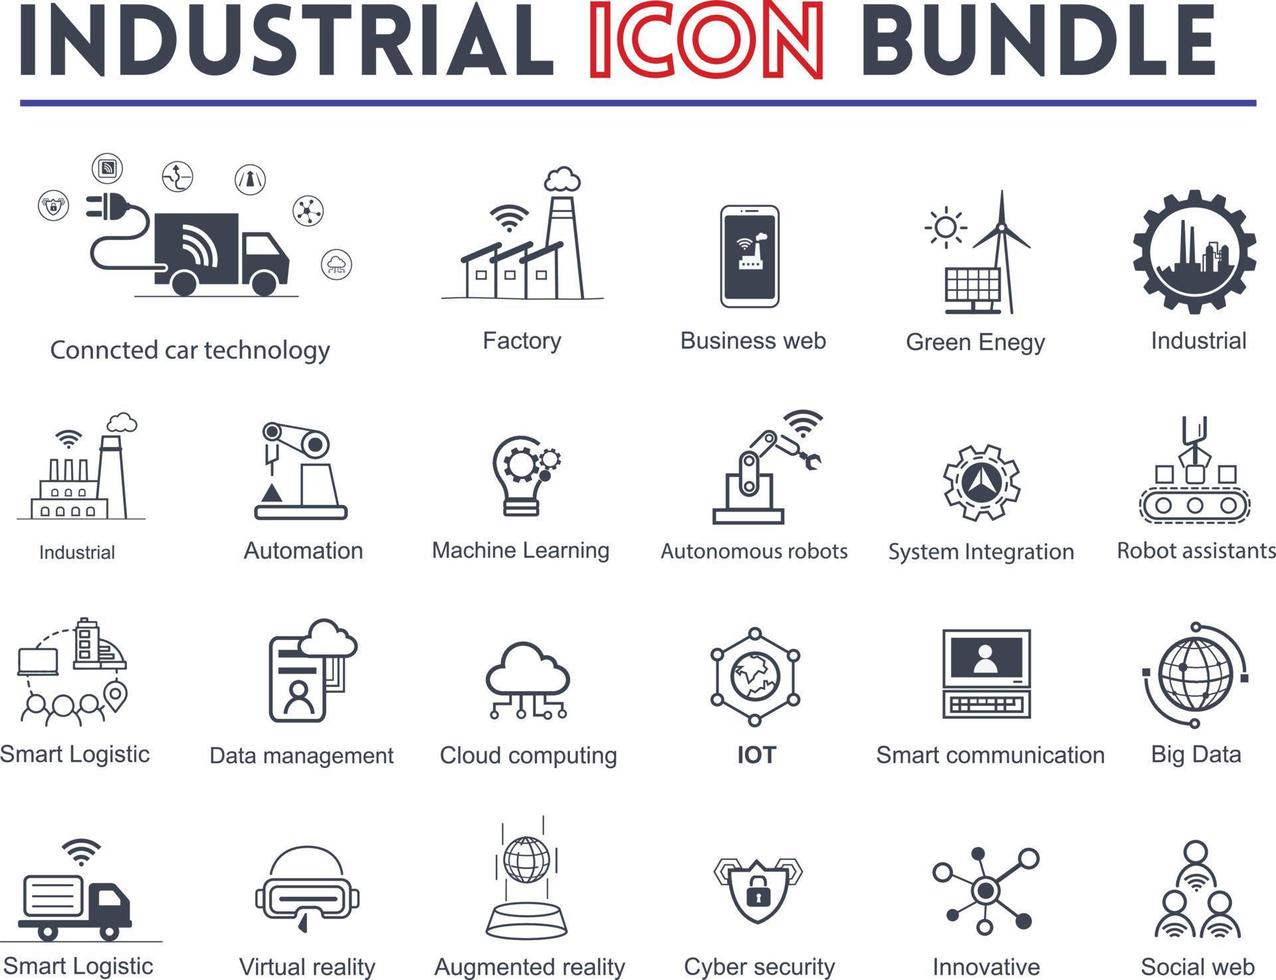 Industry icon Bundle Business icons and symbols of various industries  business sectors like services industry, automotive, life sciences, resources industry, entertainment industry and high tech vector